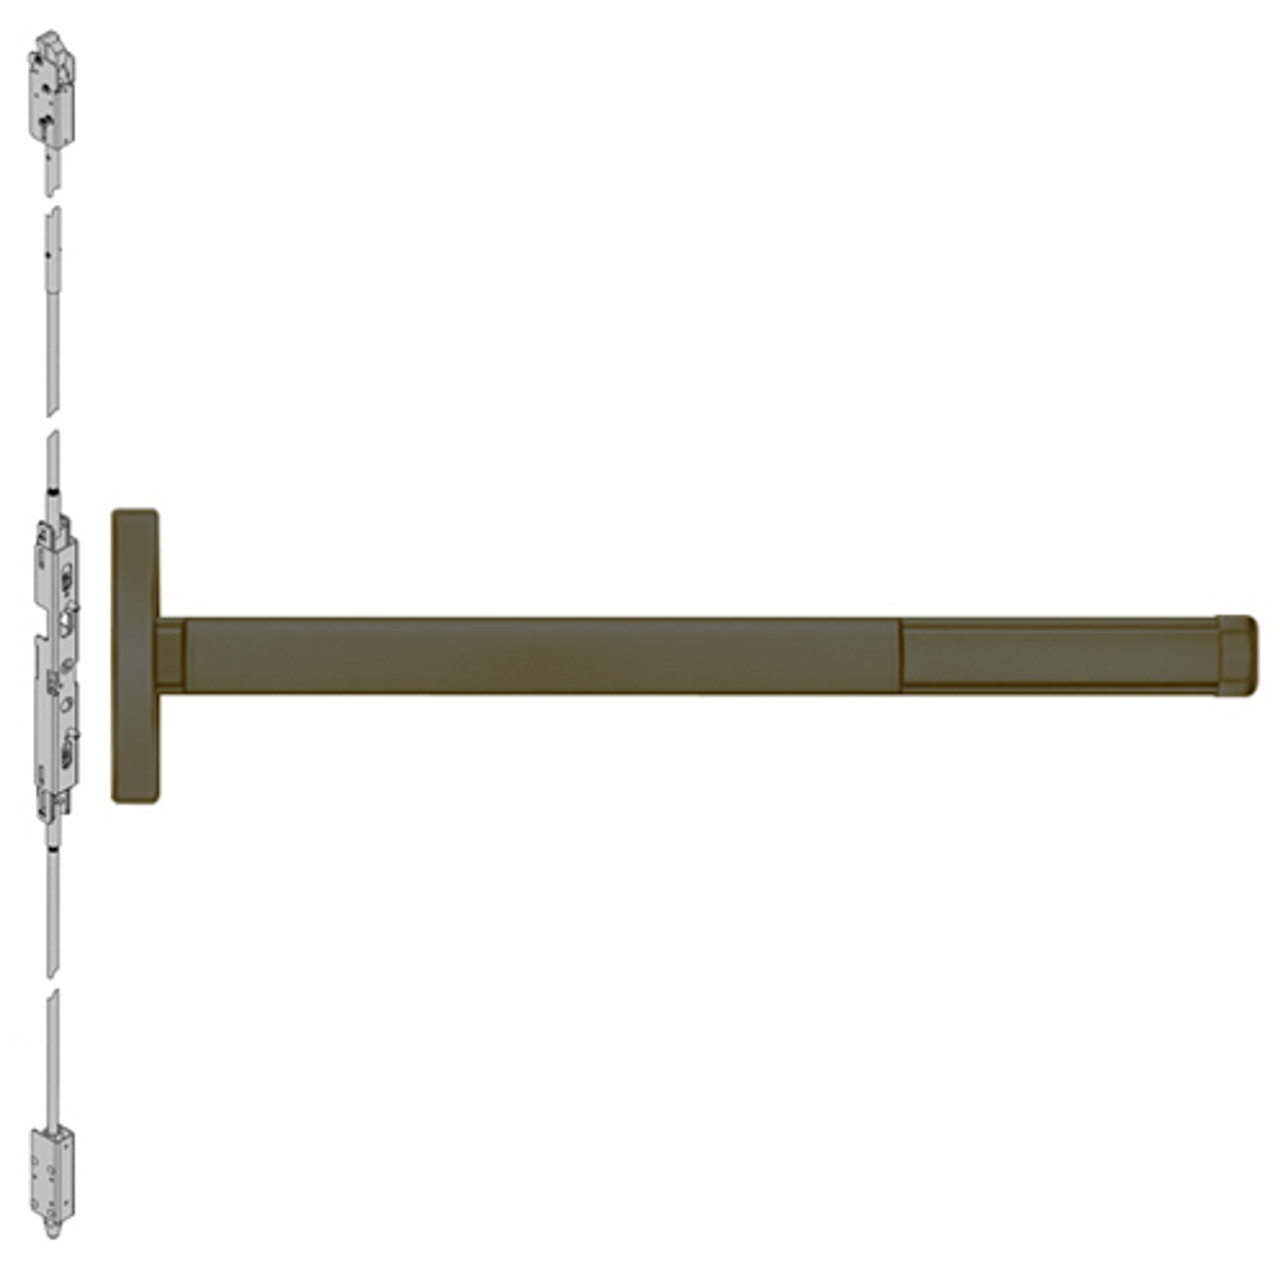 DEFL2608-613-48 PHI 2600 Series Fire Rated Concealed Vertical Rod Exit Device with Delayed Egress Prepped for Key Controls Lever in Oil Rubbed Bronze Finish